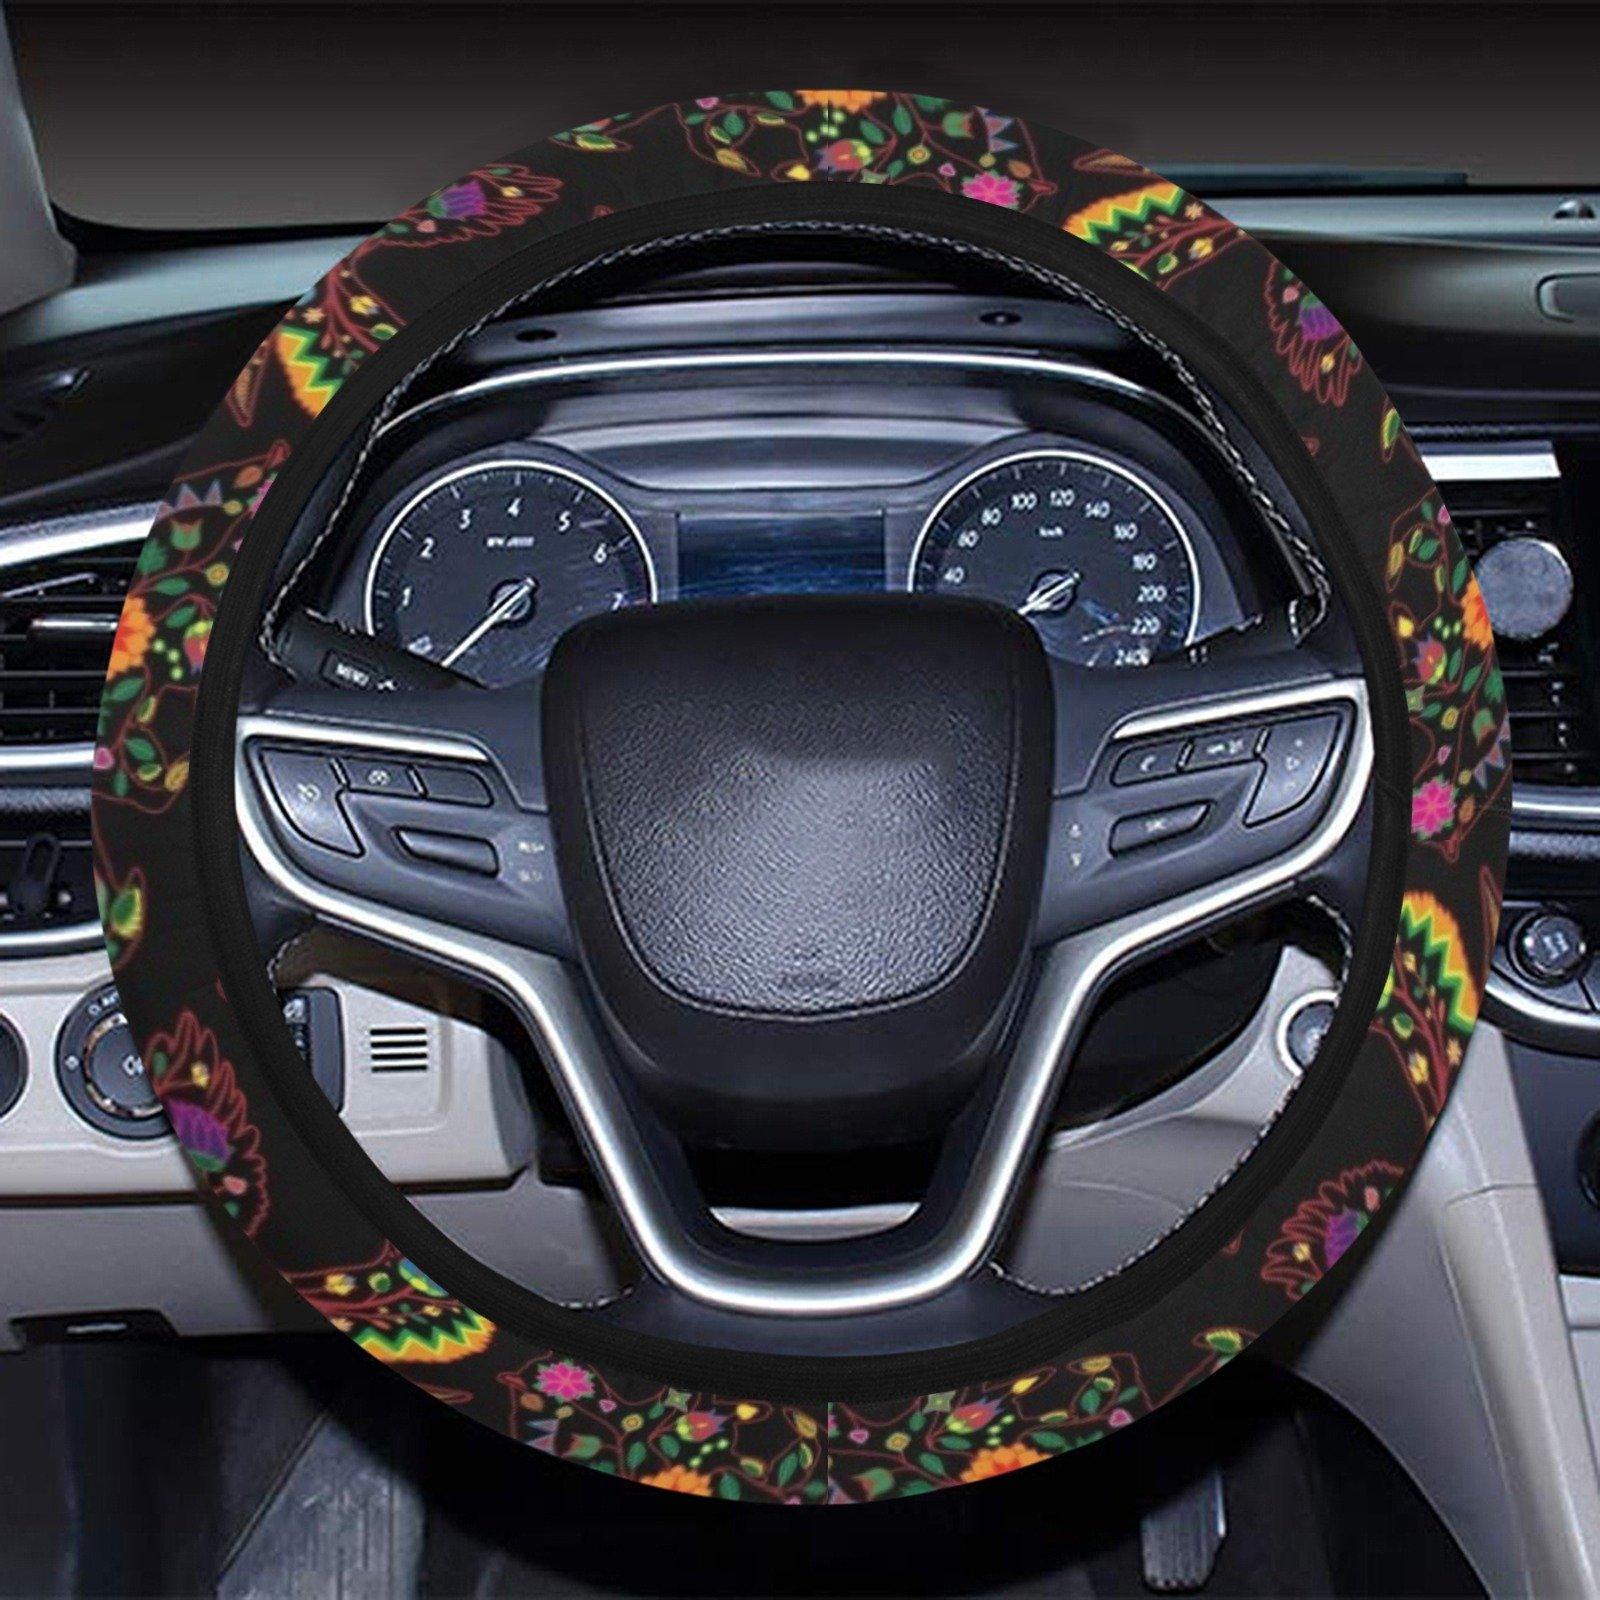 Floral Animals Steering Wheel Cover with Elastic Edge Steering Wheel Cover with Elastic Edge e-joyer 